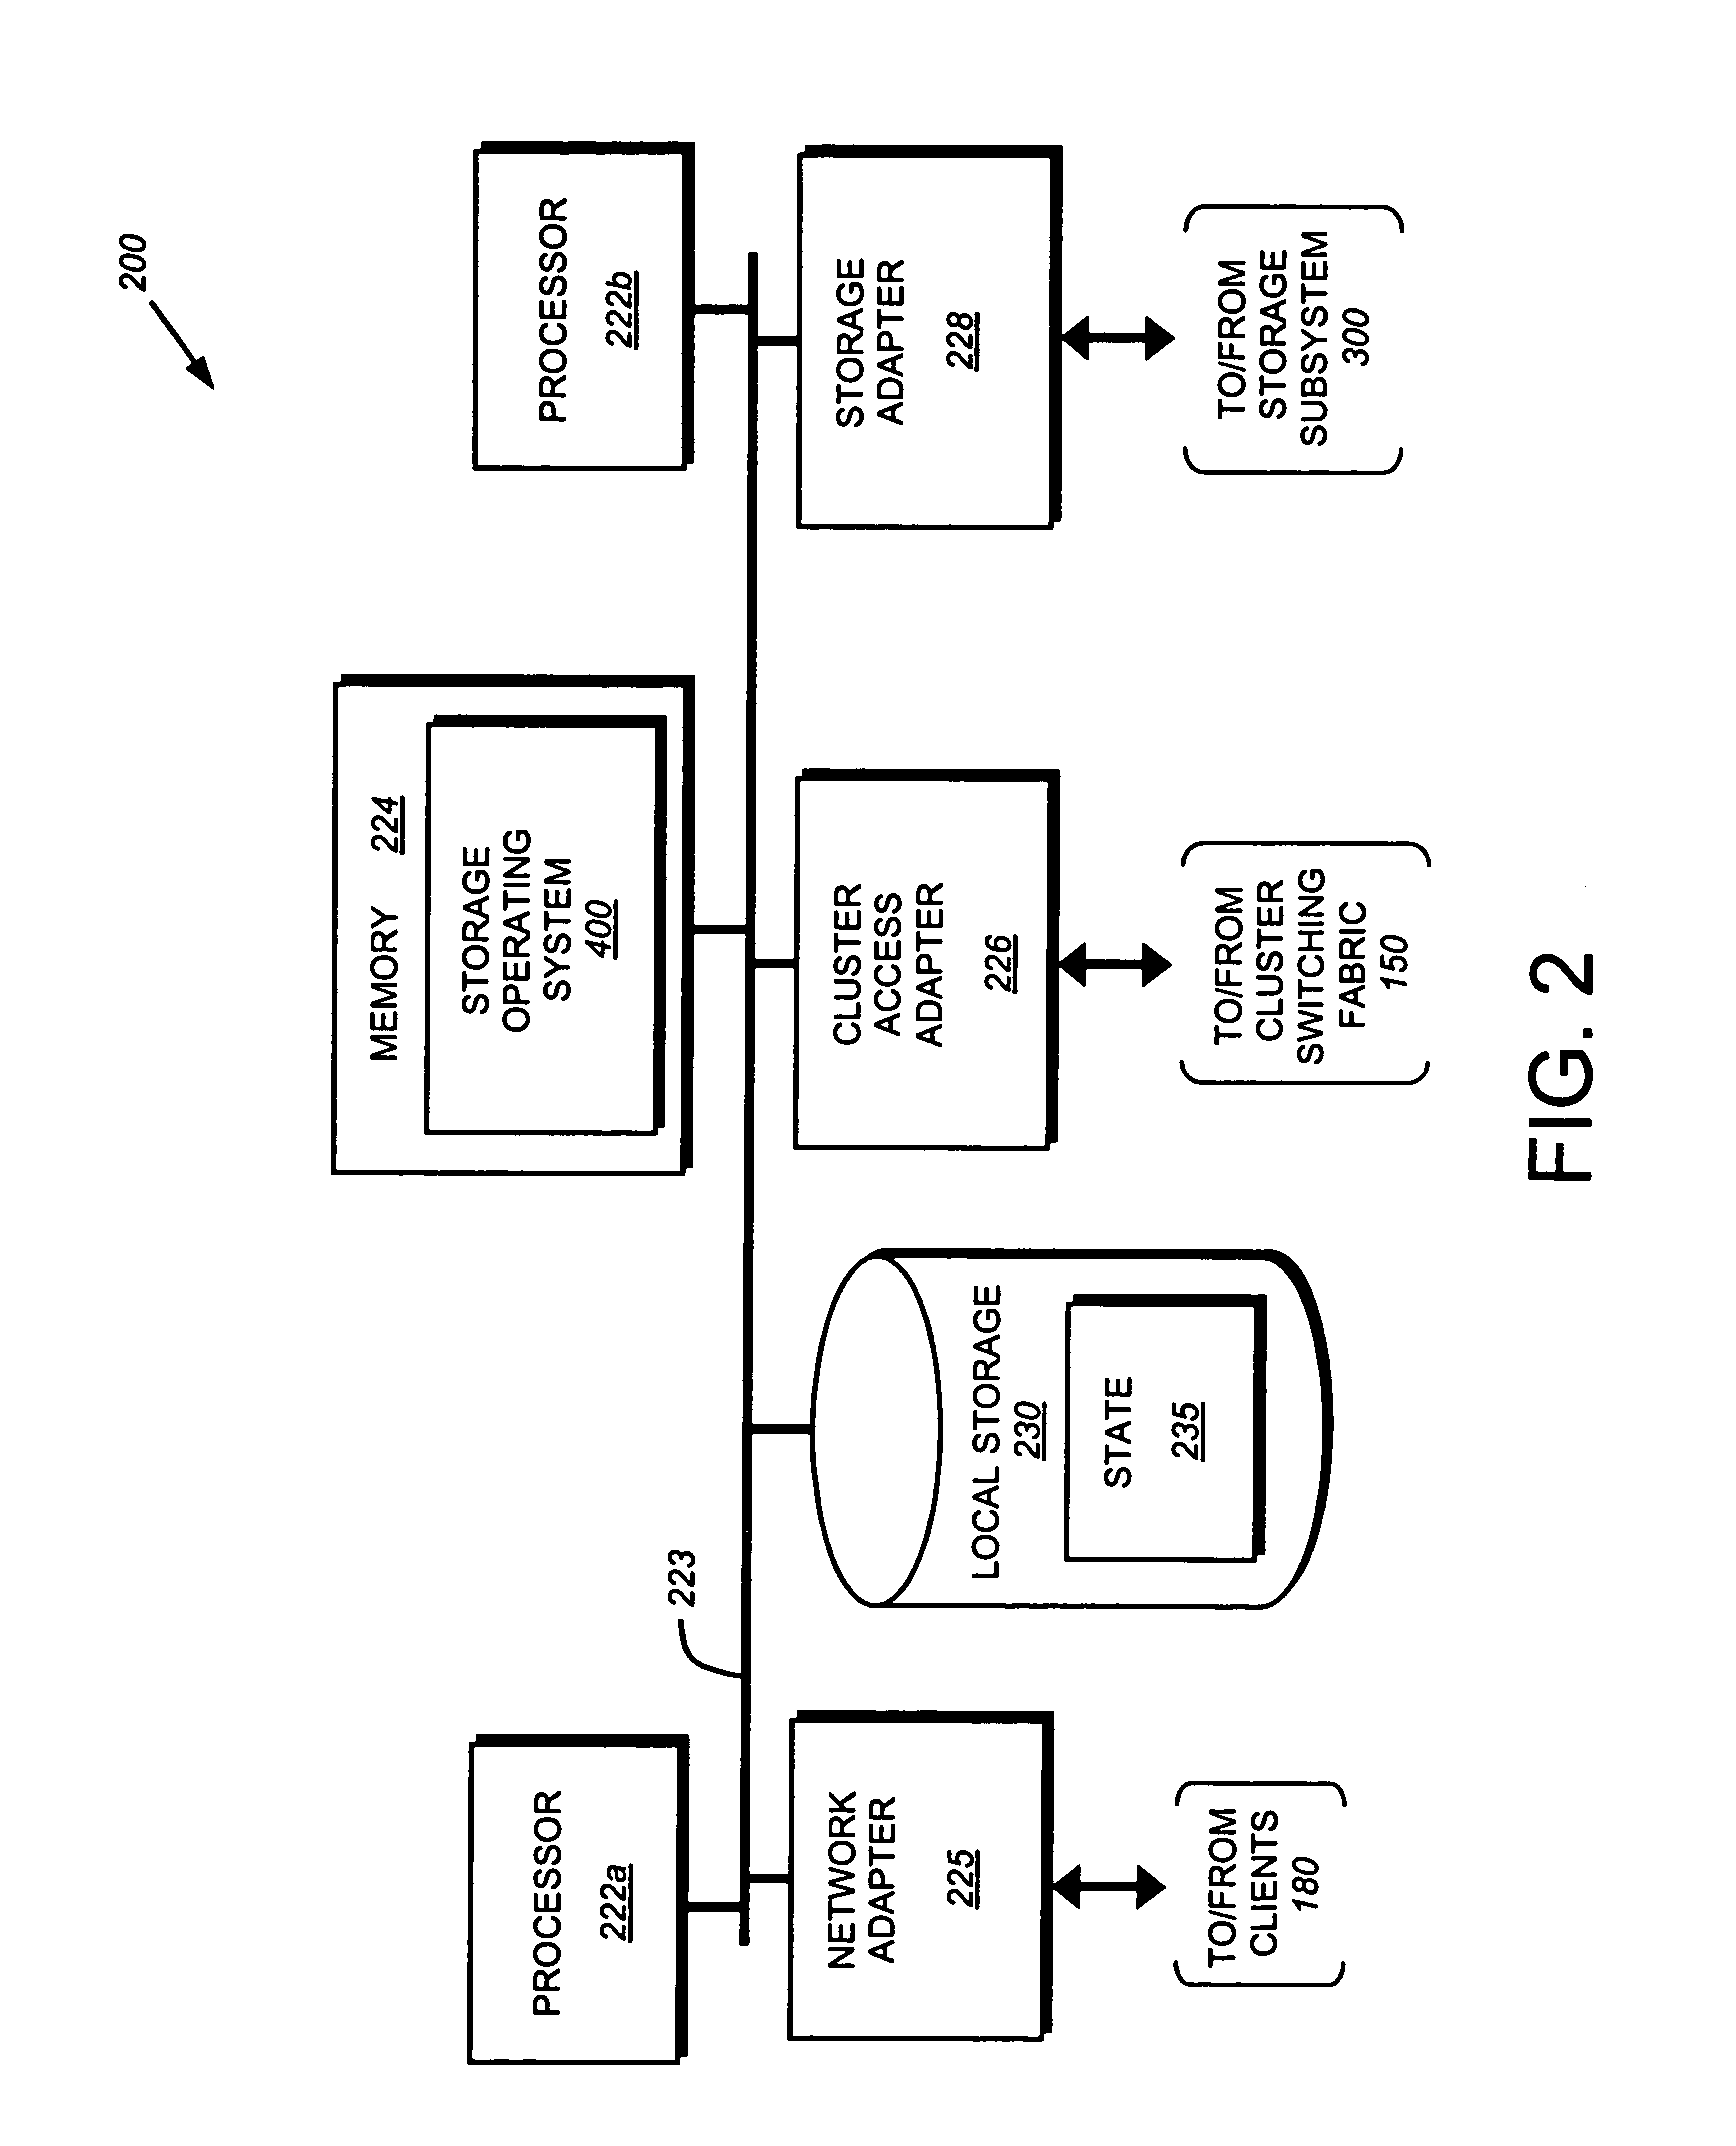 System and method for establishing bi-directional failover in a two node cluster